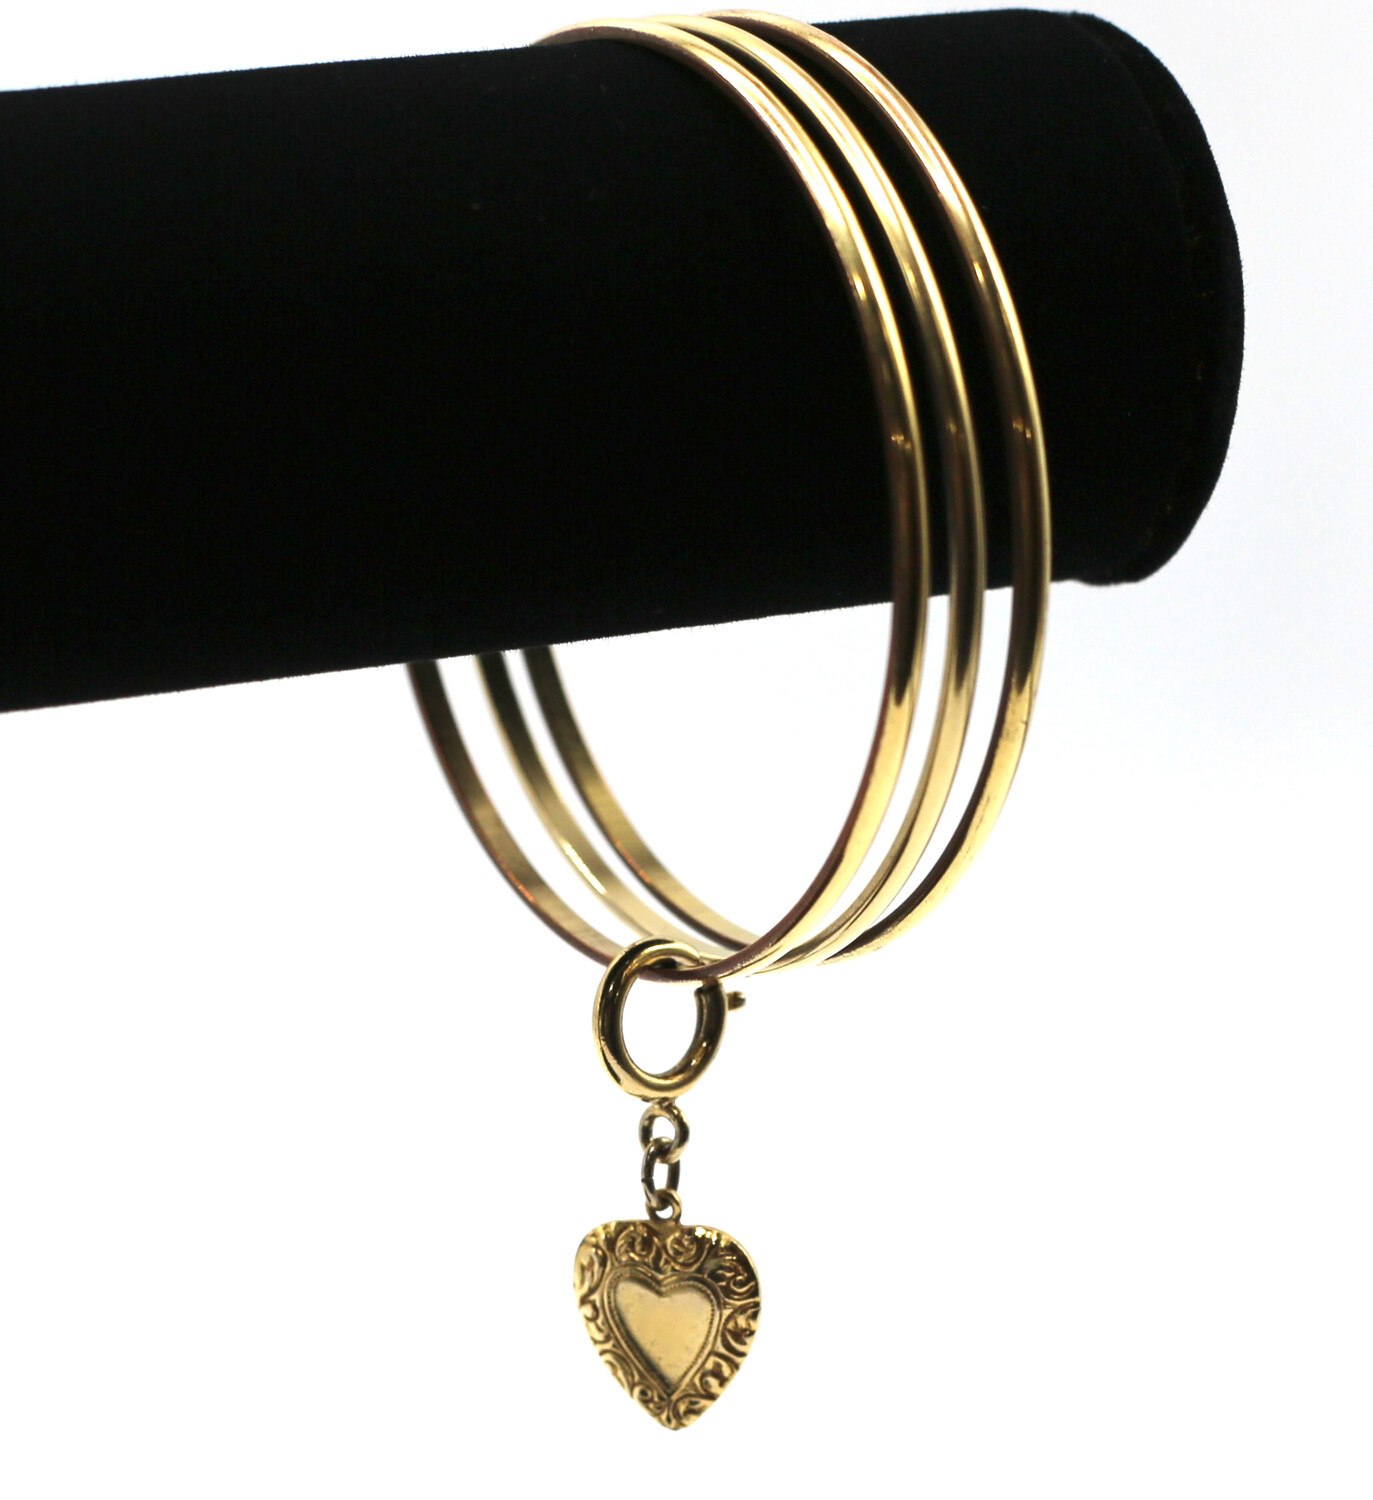 CLASSIC GOLD BANGLE with GOLD HEART CHARM